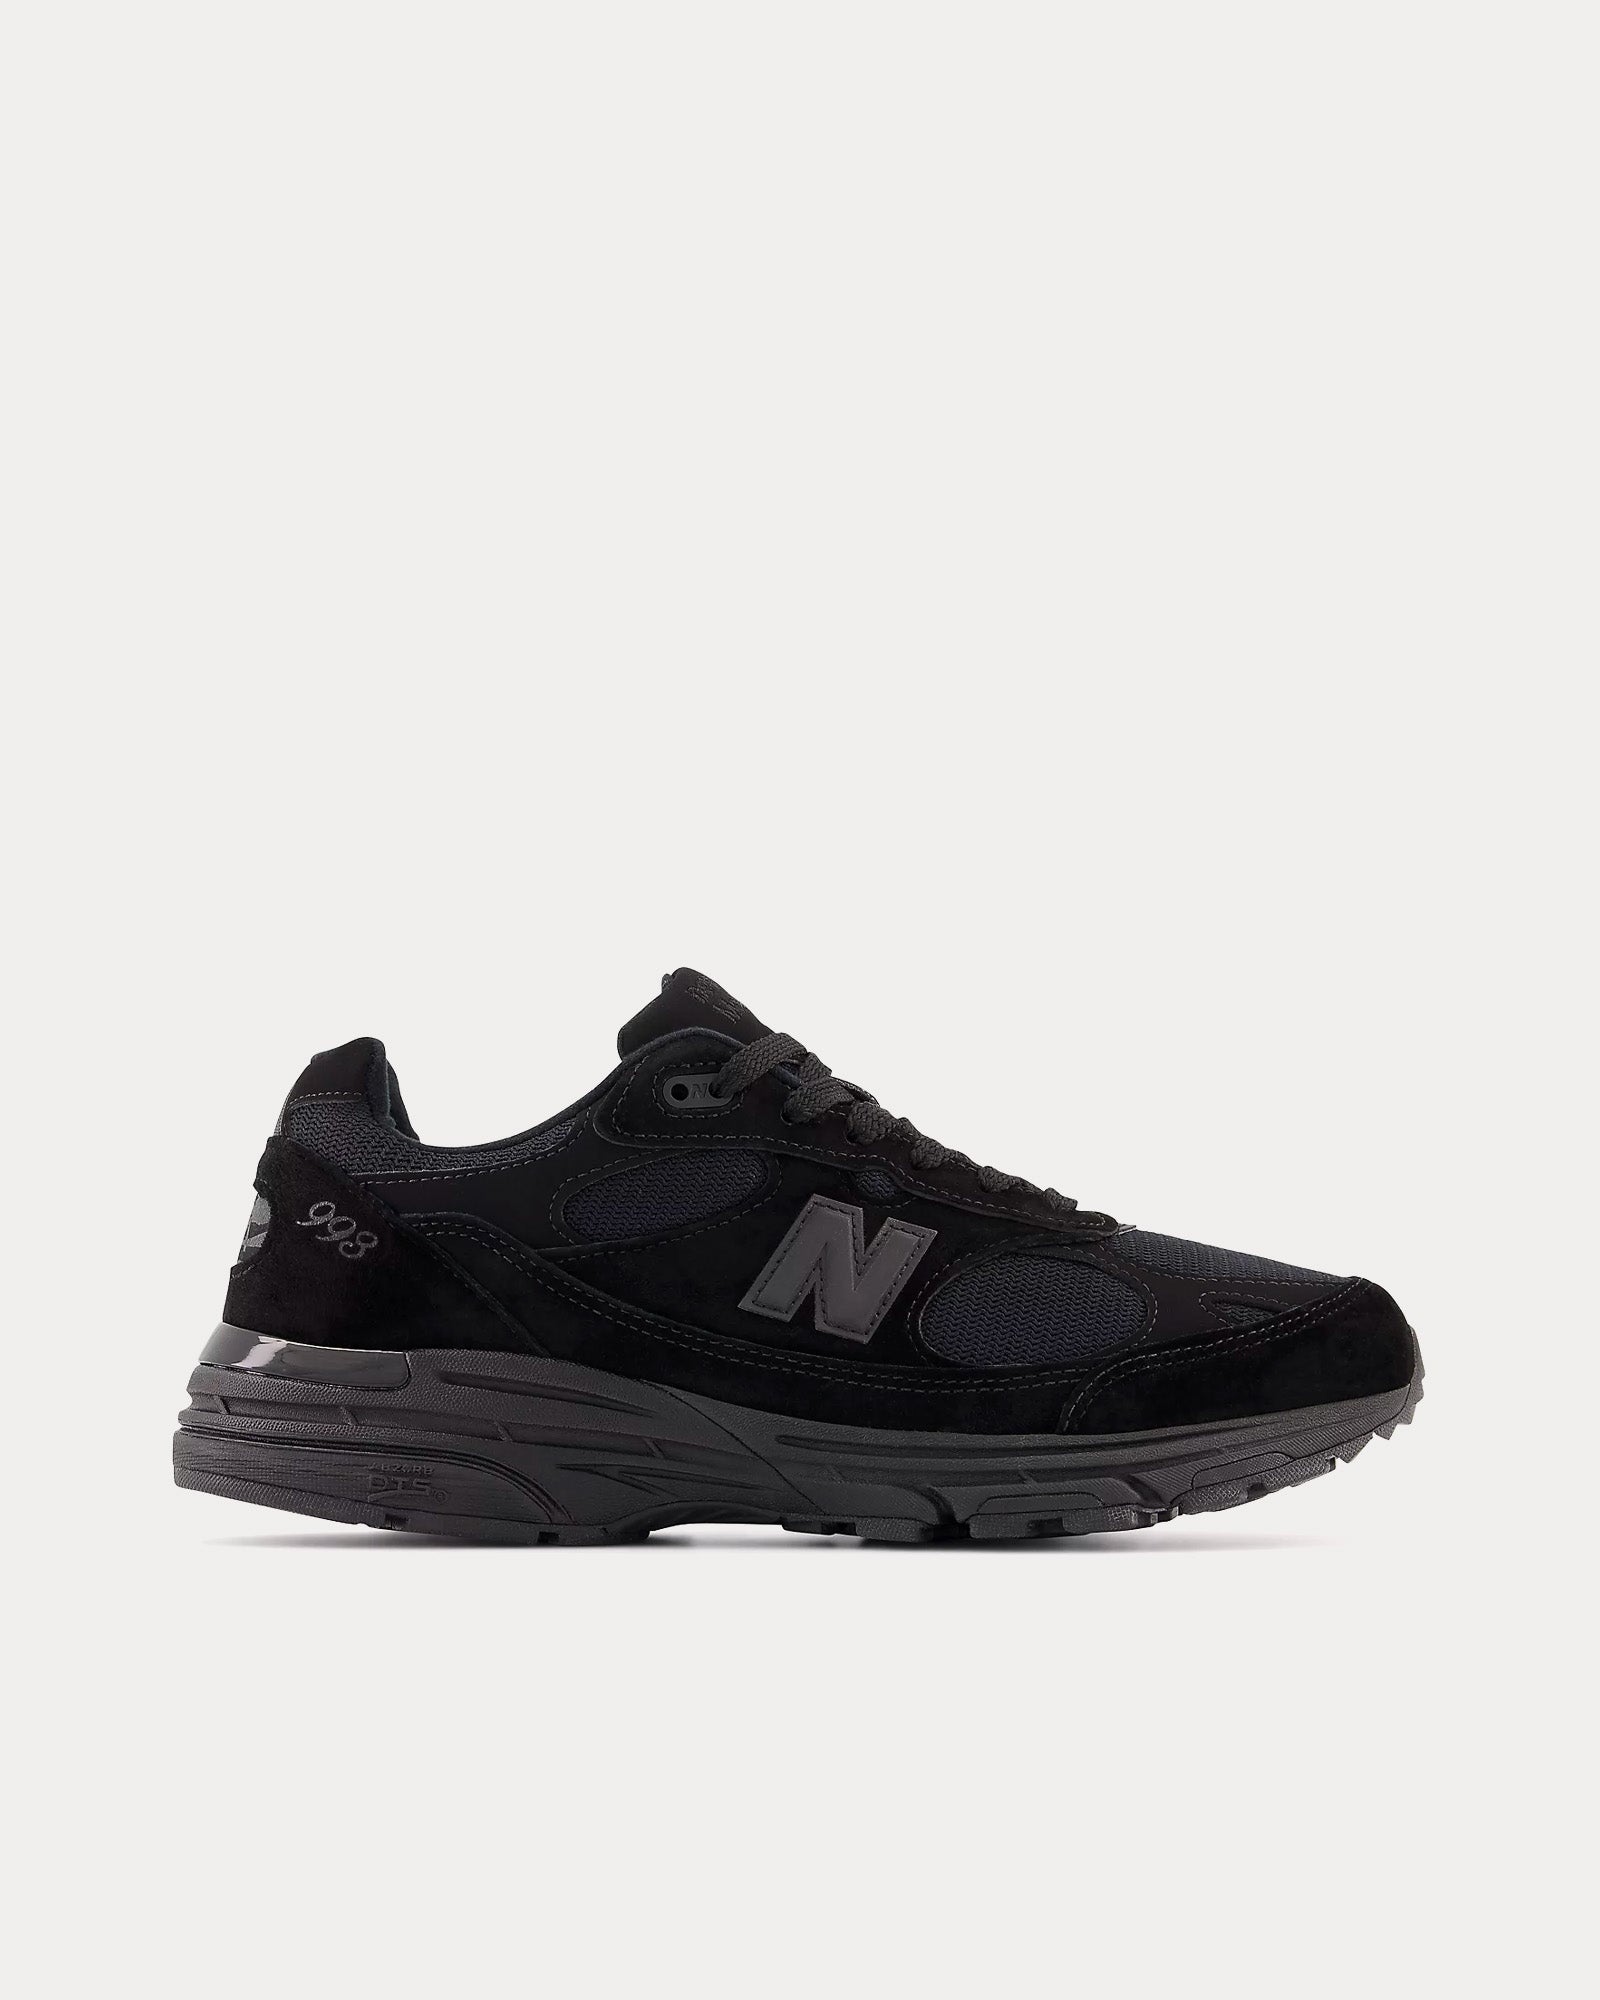 New Balance Made in USA 993 Black Low Top Sneakers - Sneak in Peace